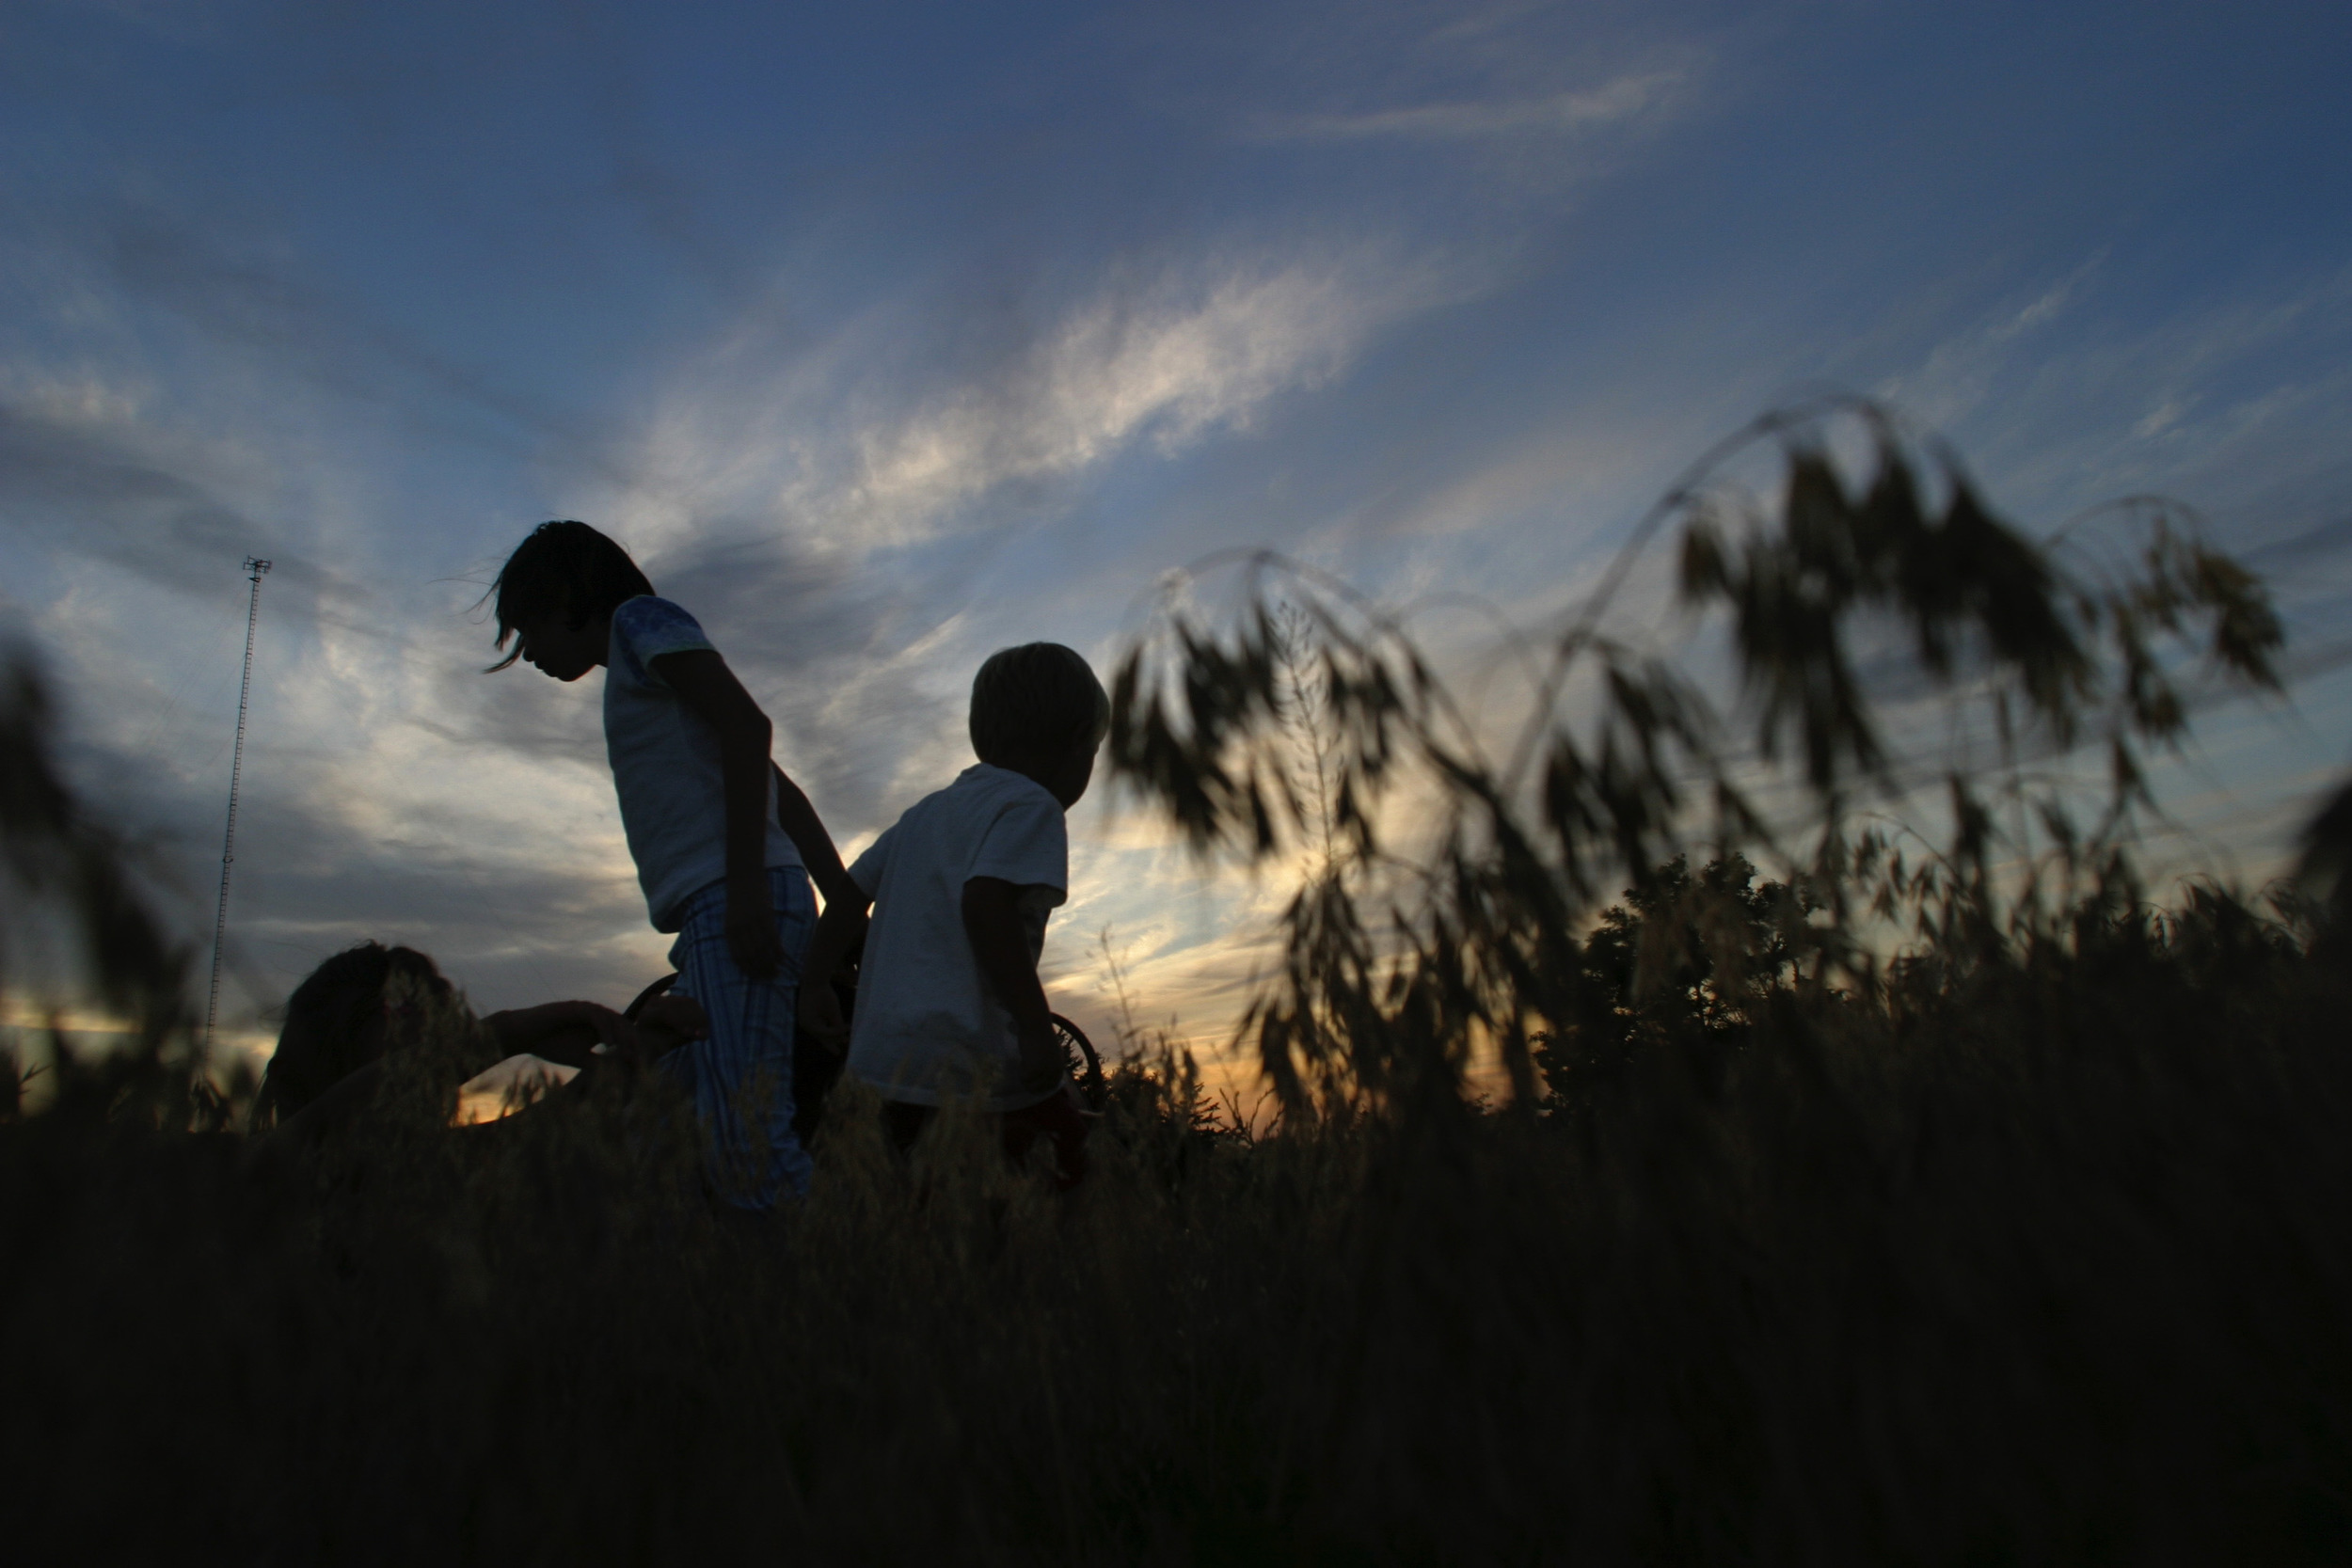  Austin Horn, 6, and his cousin London Busby , 9,  look for grasshoppers in the timothy grass on an Oklahoma summer evening in Weatherford.  